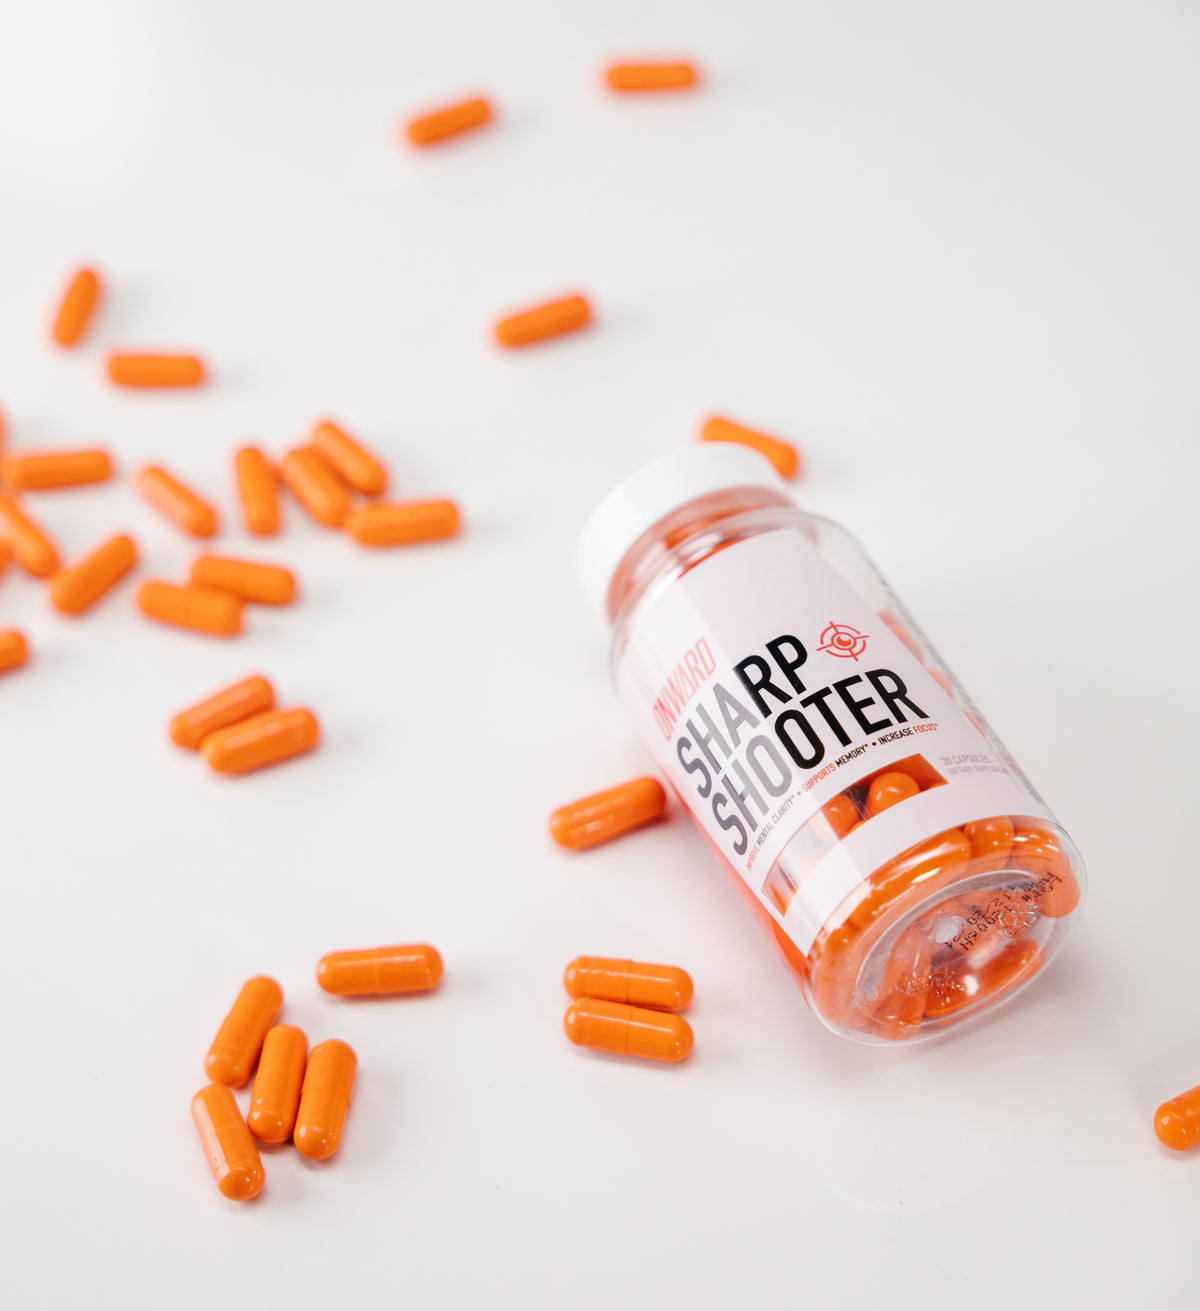 A clear bottle of Onward lies on its side agains a white background with orange capsules scattered.